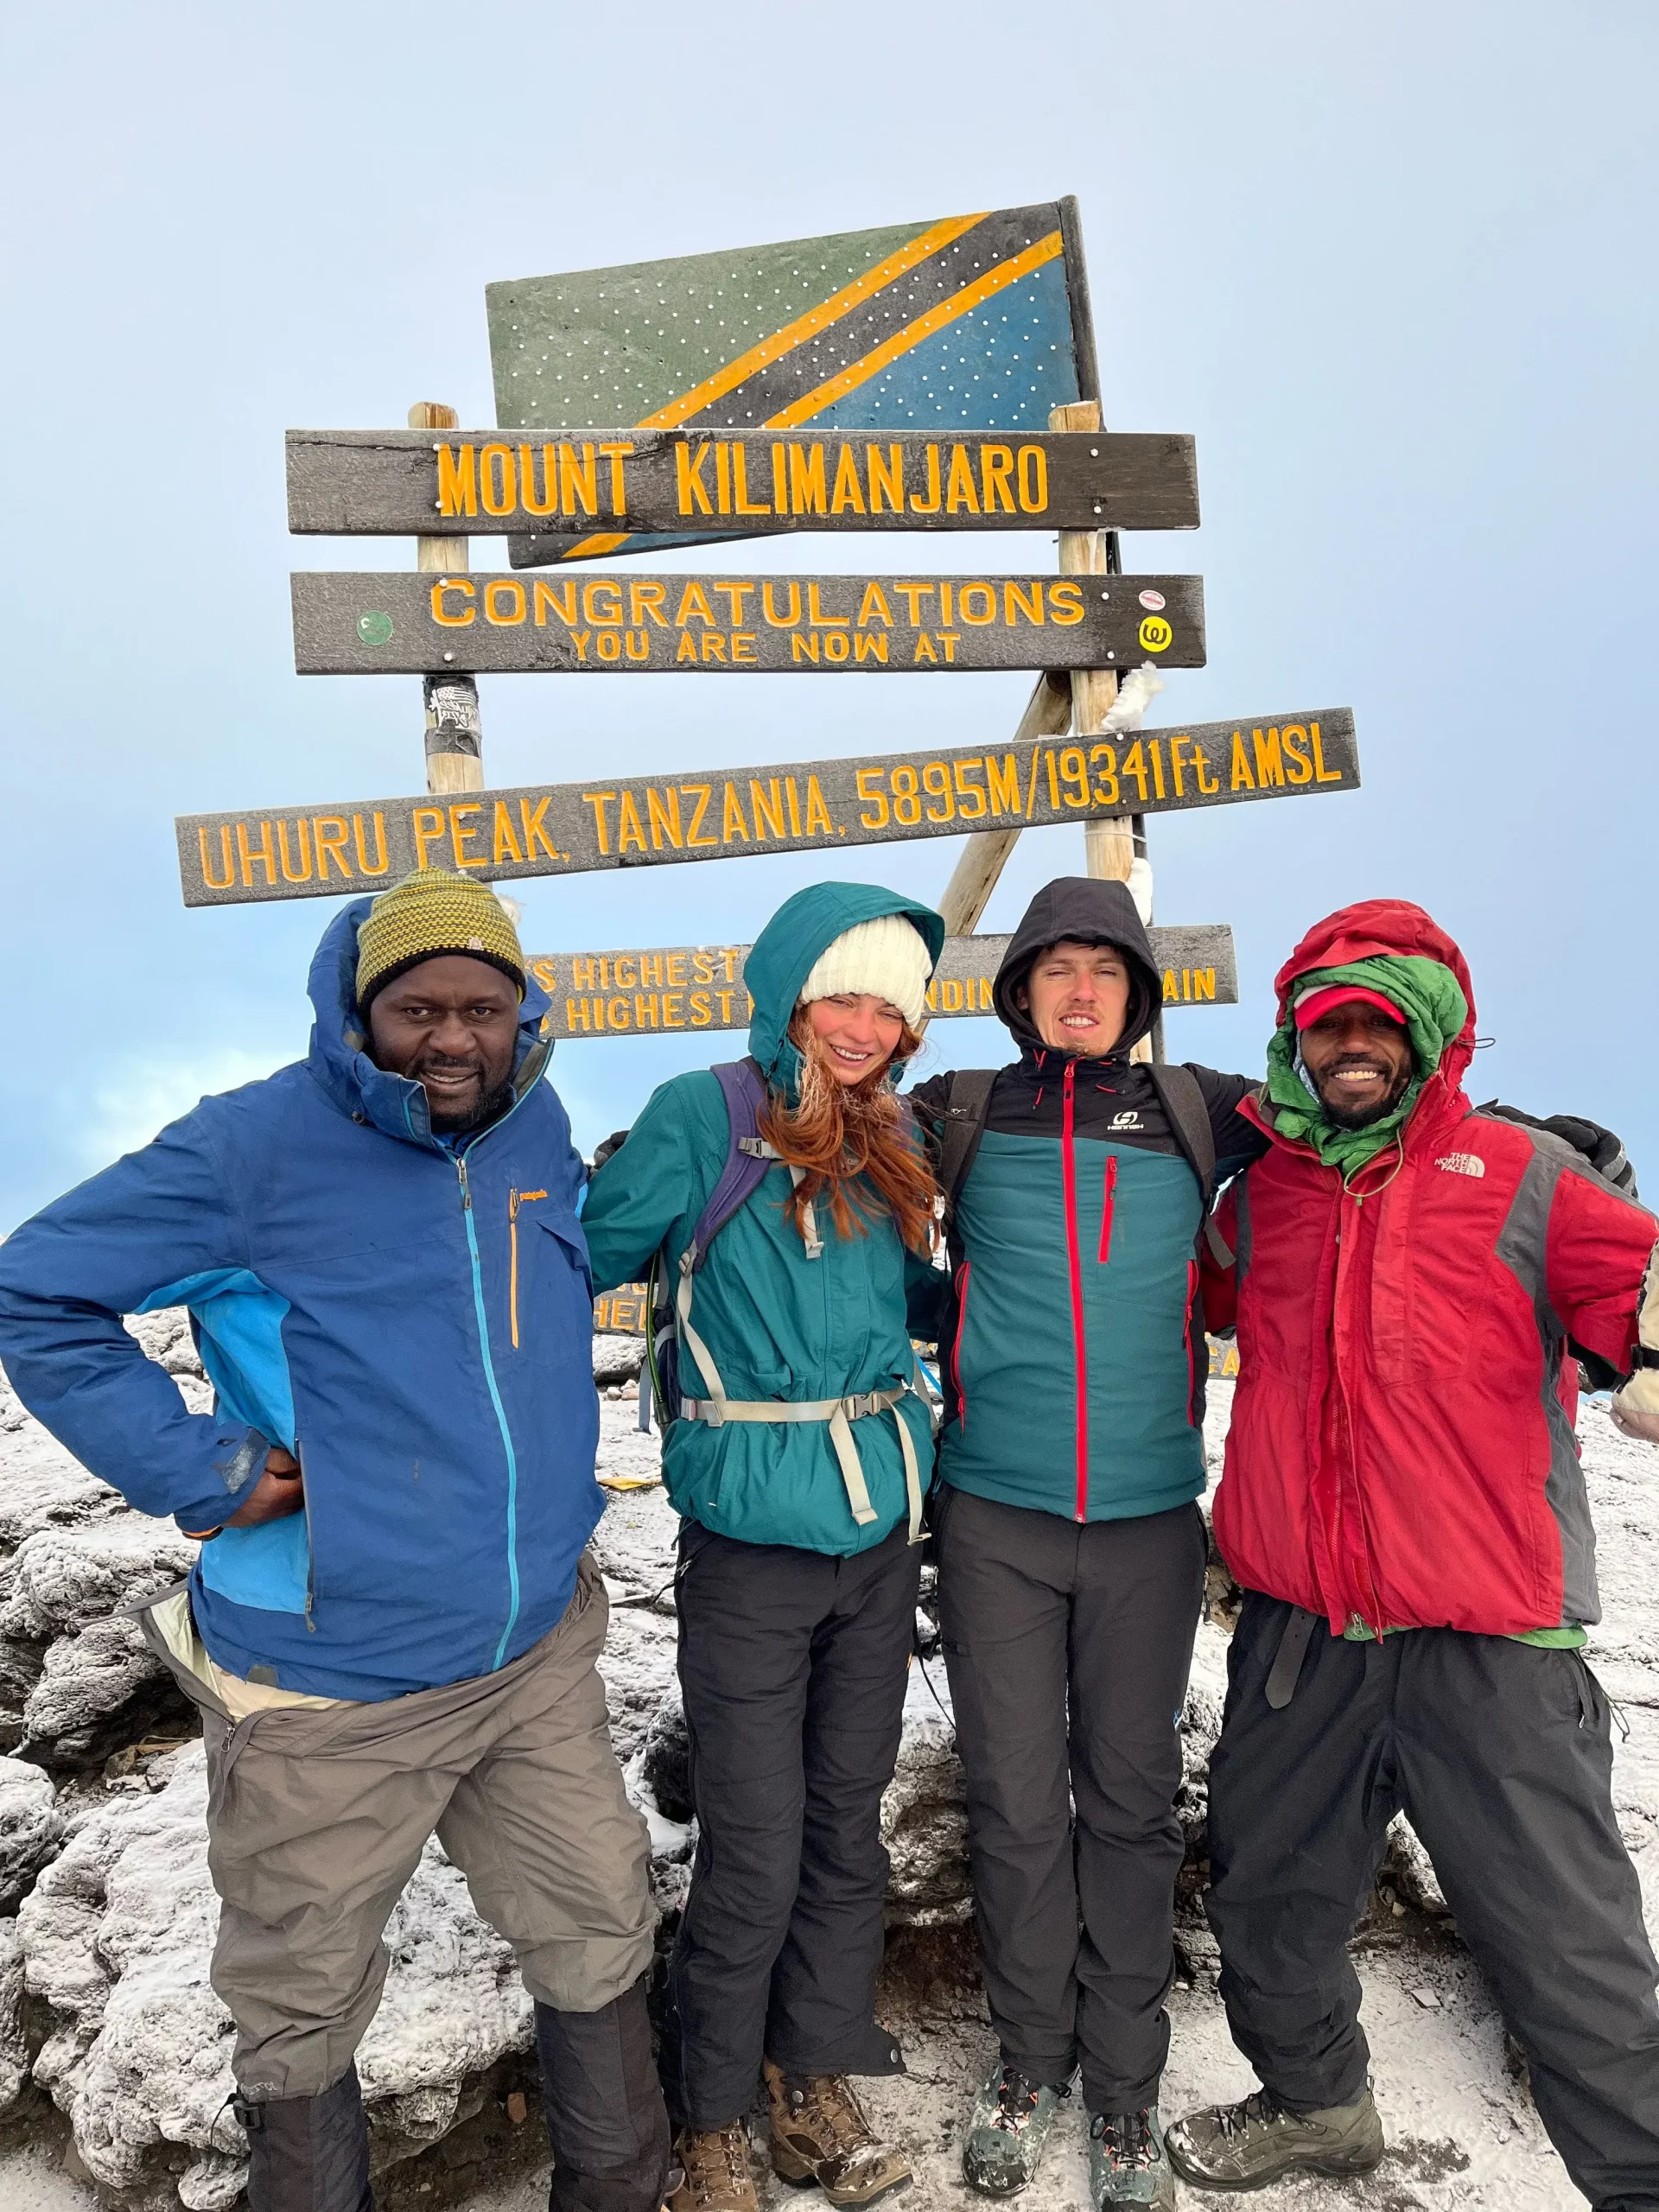 Our travelers who are a group of friends taking a picture with the Kilimanjaro summit at uhuru peak